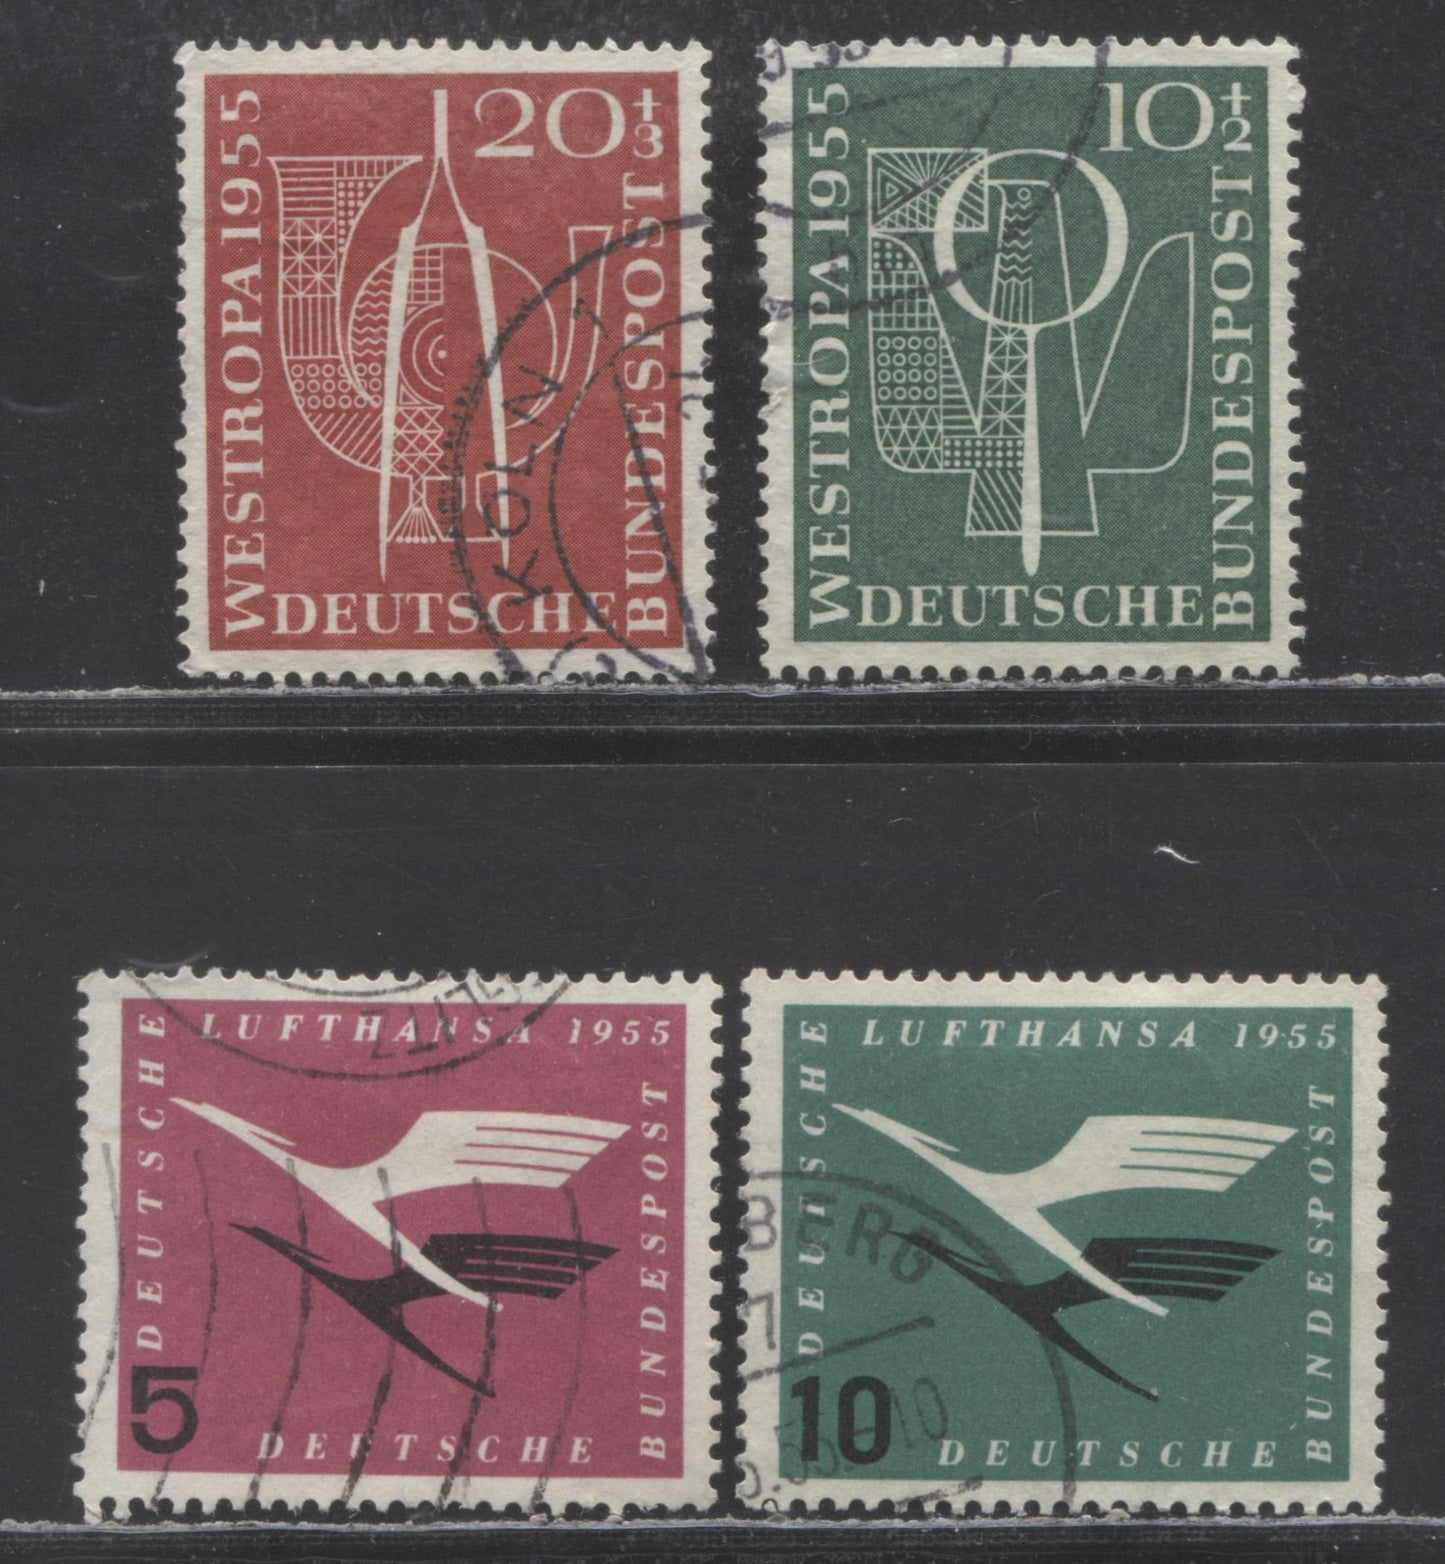 Lot 35 Germany SC#B342/C62 1955 Westropa Semi Postal & Airmail Issues, 4 Very Fine Used Singles, Click on Listing to See ALL Pictures, 2022 Scott Cat. $20.3